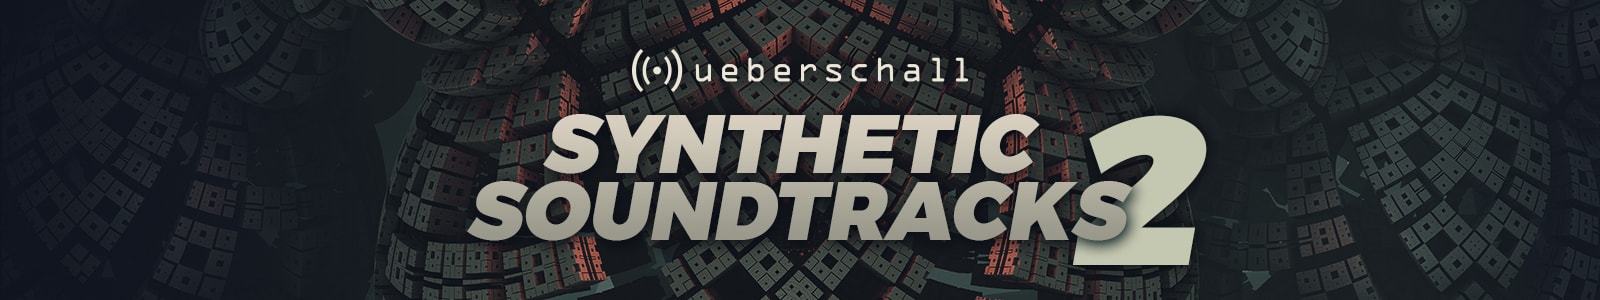 synthetic soundtracks 2 by ueberschall